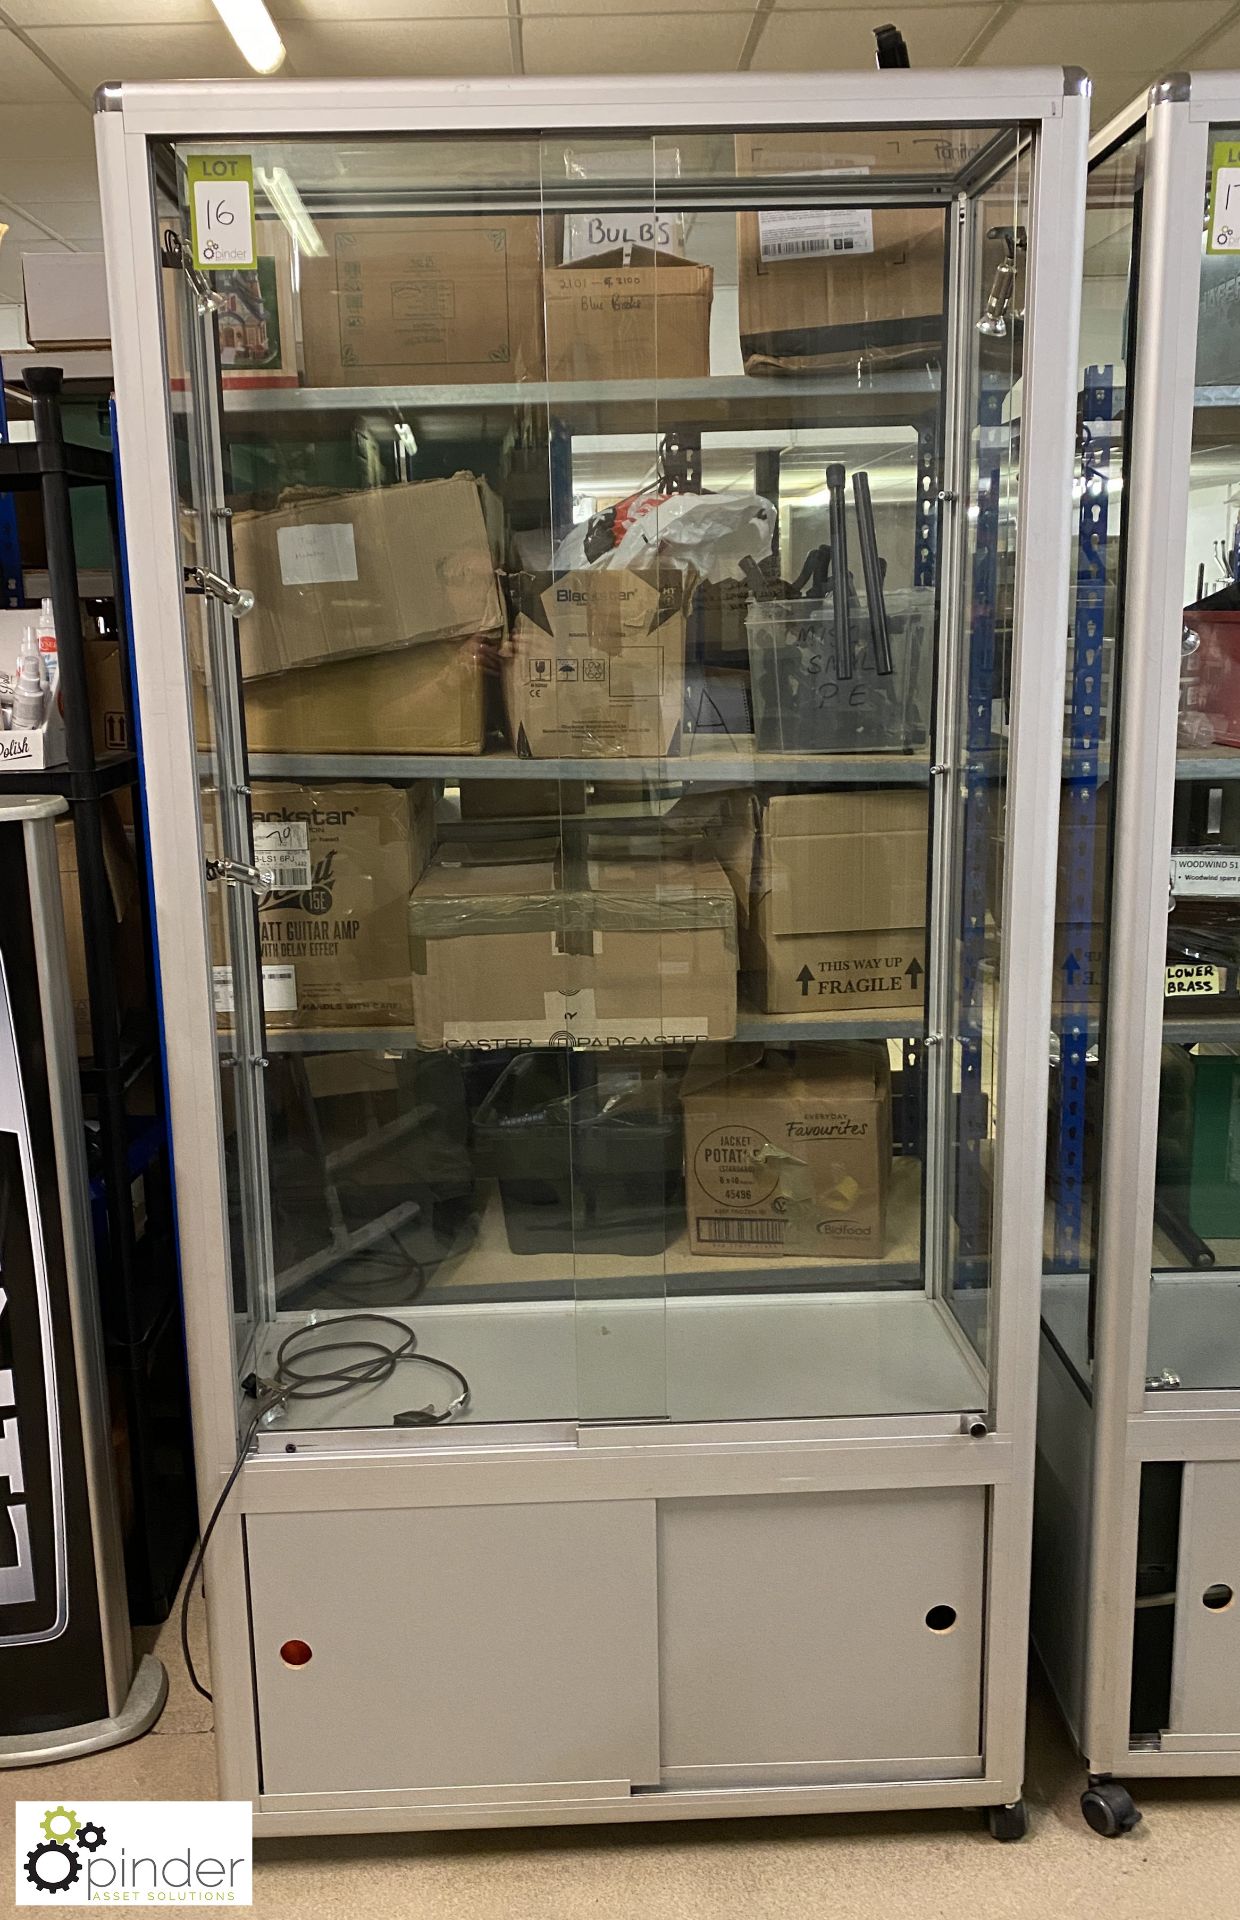 Mobile glazed illuminated Display Cabinet, 1000mm x 450mm x 2050mm, with shelves - Image 2 of 3